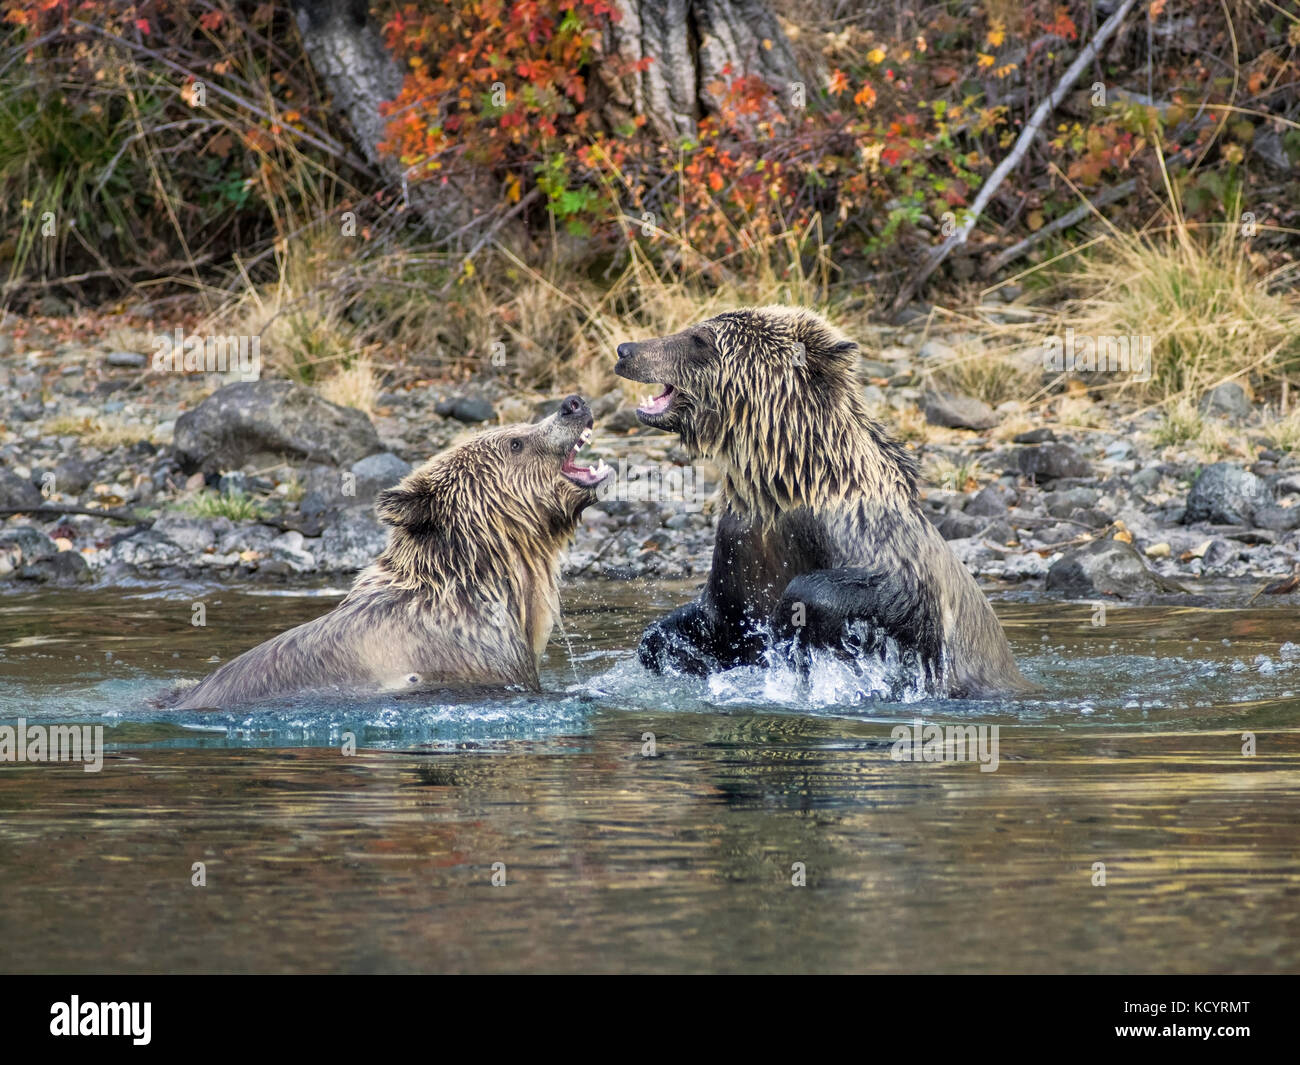 Grizzly Bears (Ursus arctos horribilis), sparing in a salmon stream Central British Columbia, Canada Stock Photo